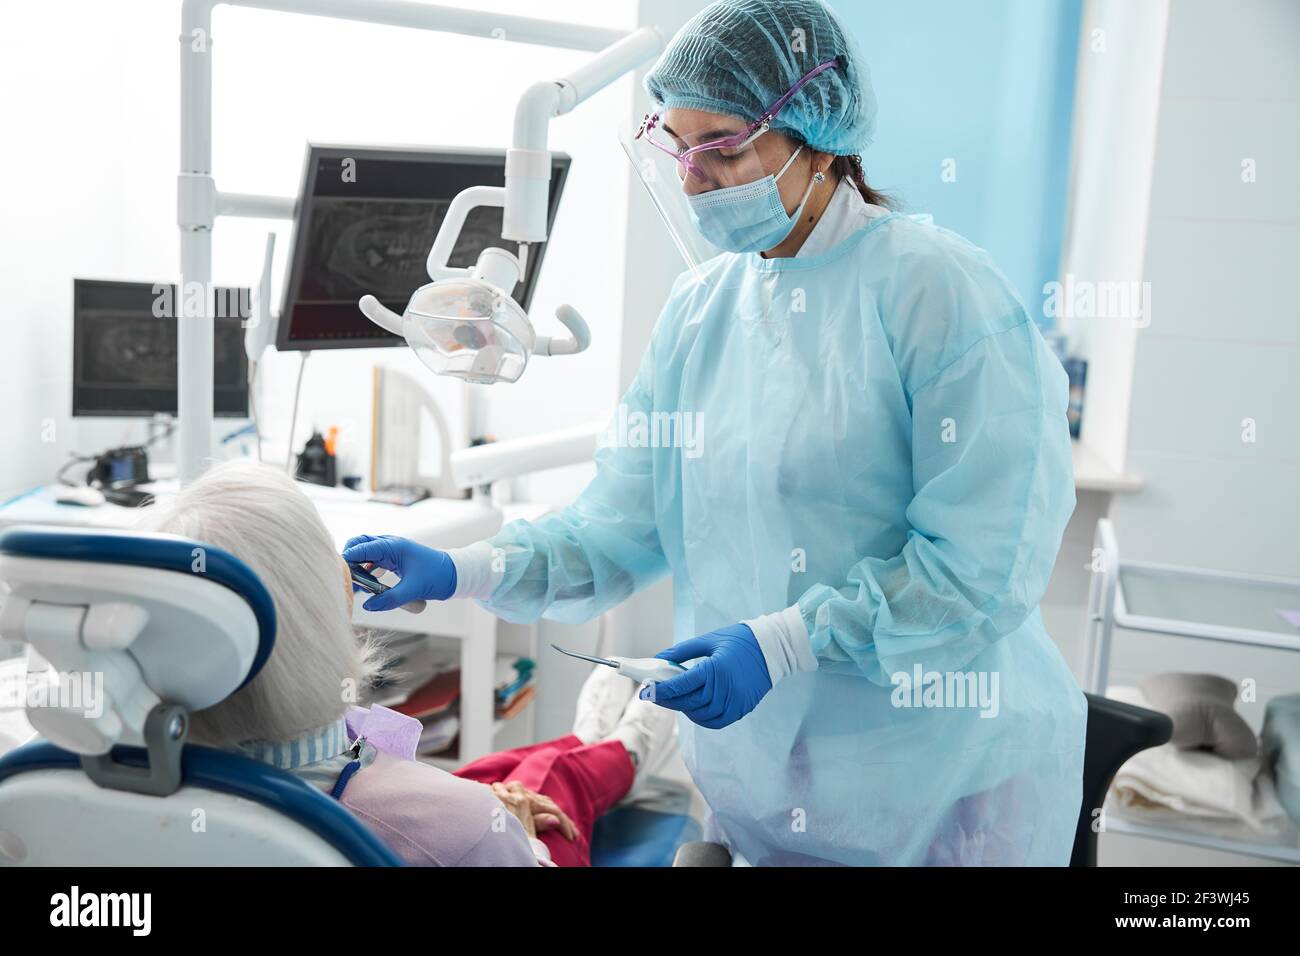 Female dental surgeon doing a dental extraction on patient Stock Photo